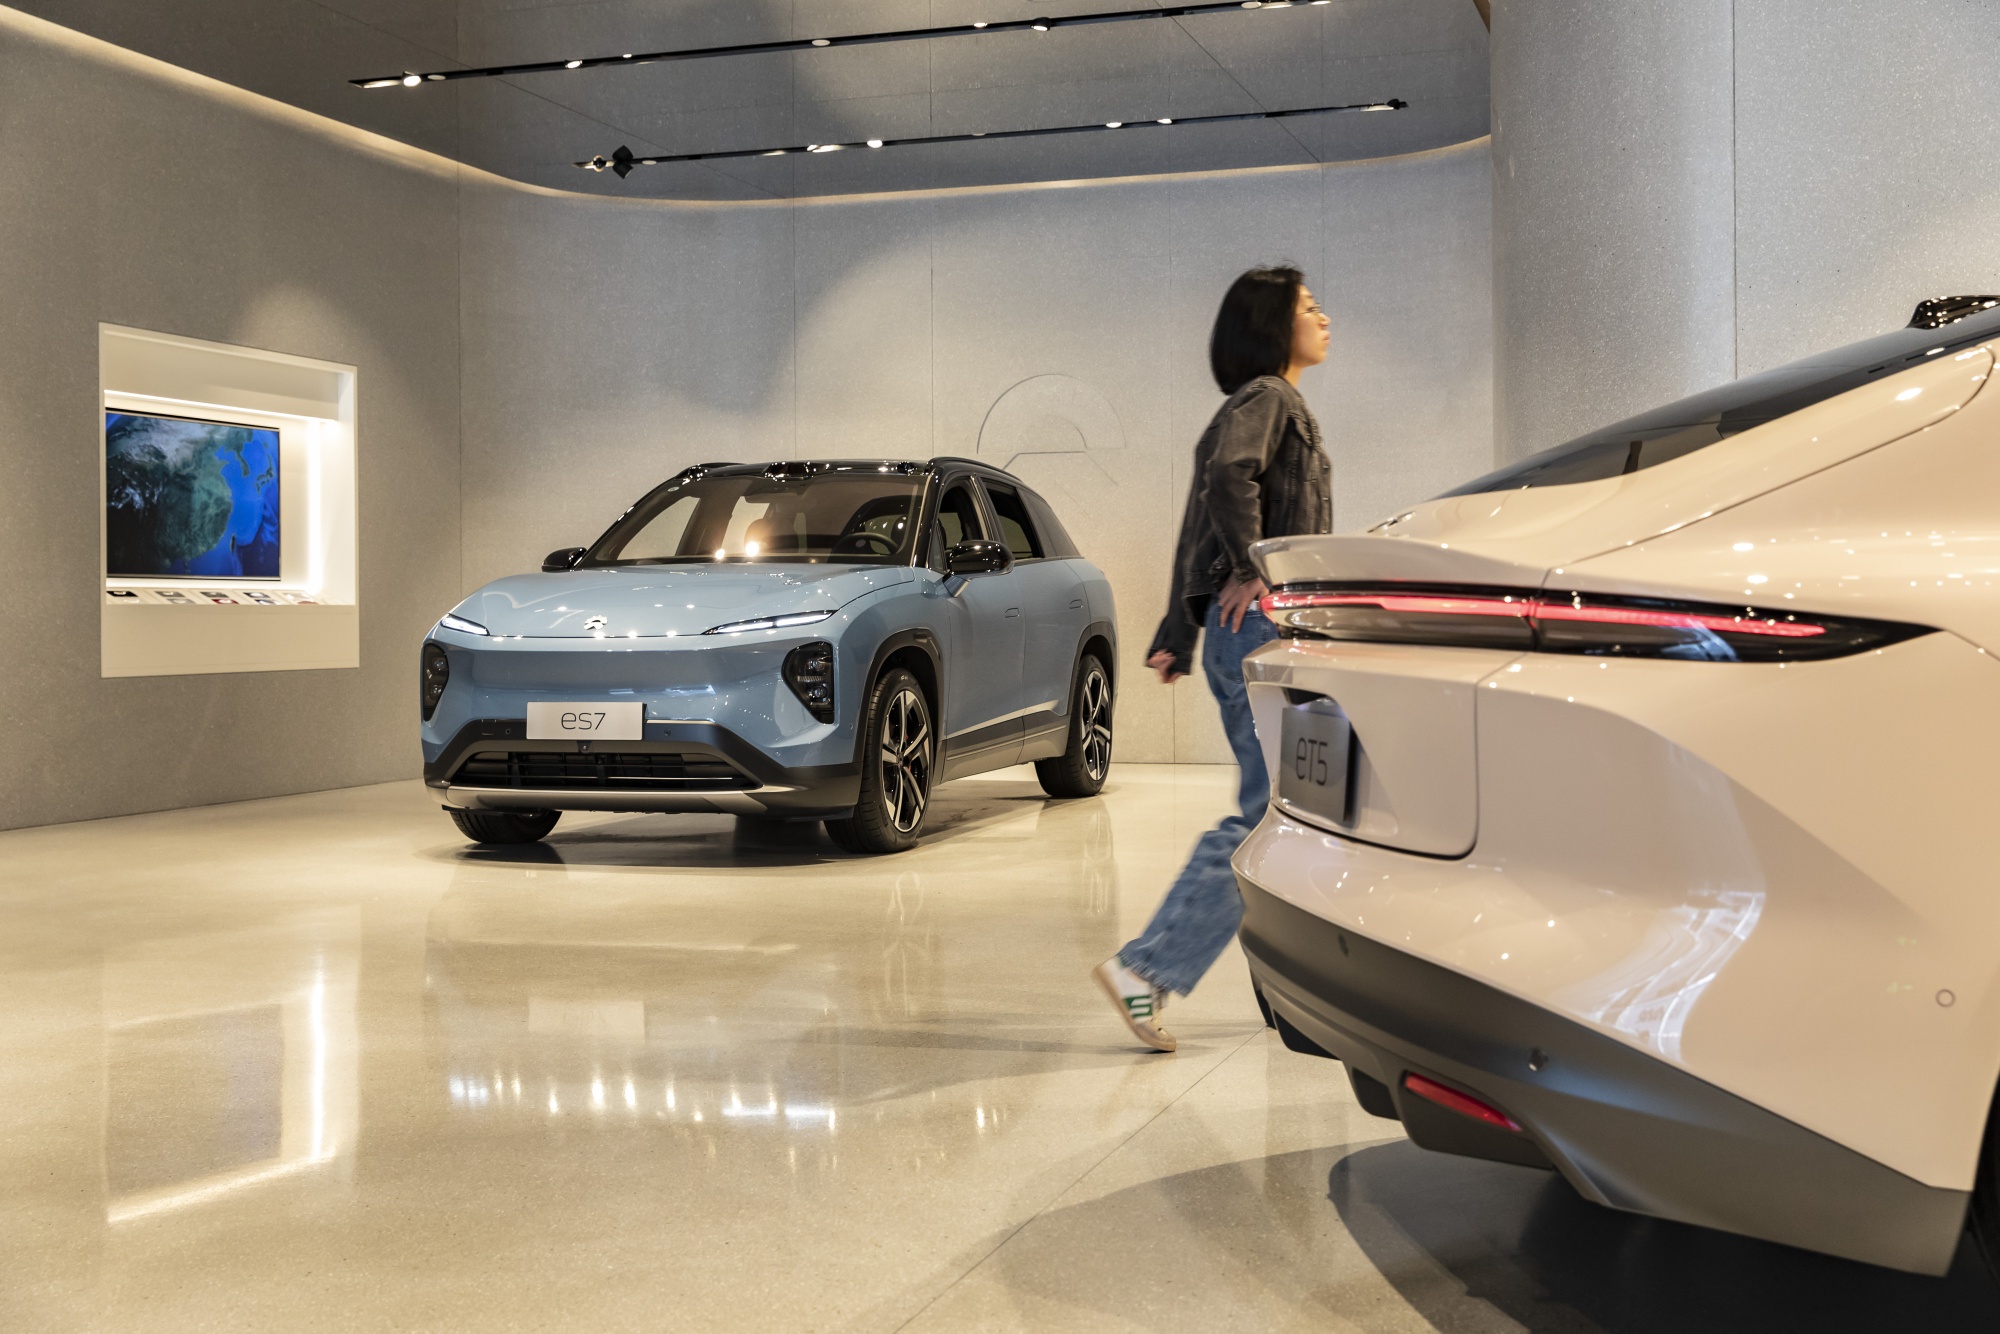 A Nio Inc. ES7 electric sports utility vehicle, left, and a Nio ET5 electric sedan at a dealership in Shanghai, China.